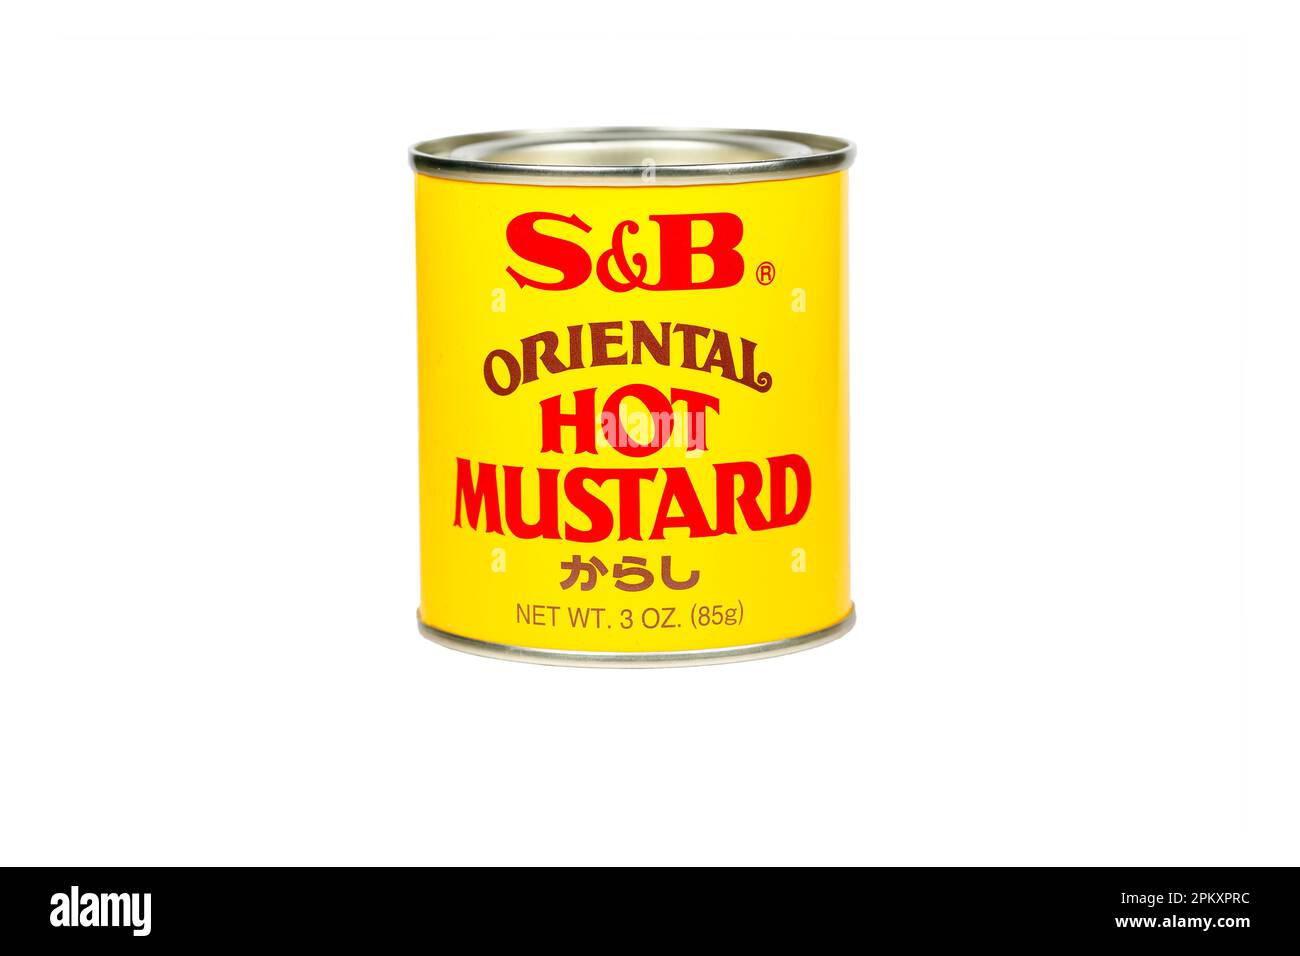 A tin of S&B brand Oriental Hot Mustard powder からし isolated on a white background. cutout image for illustration and editorial use. Stock Photo